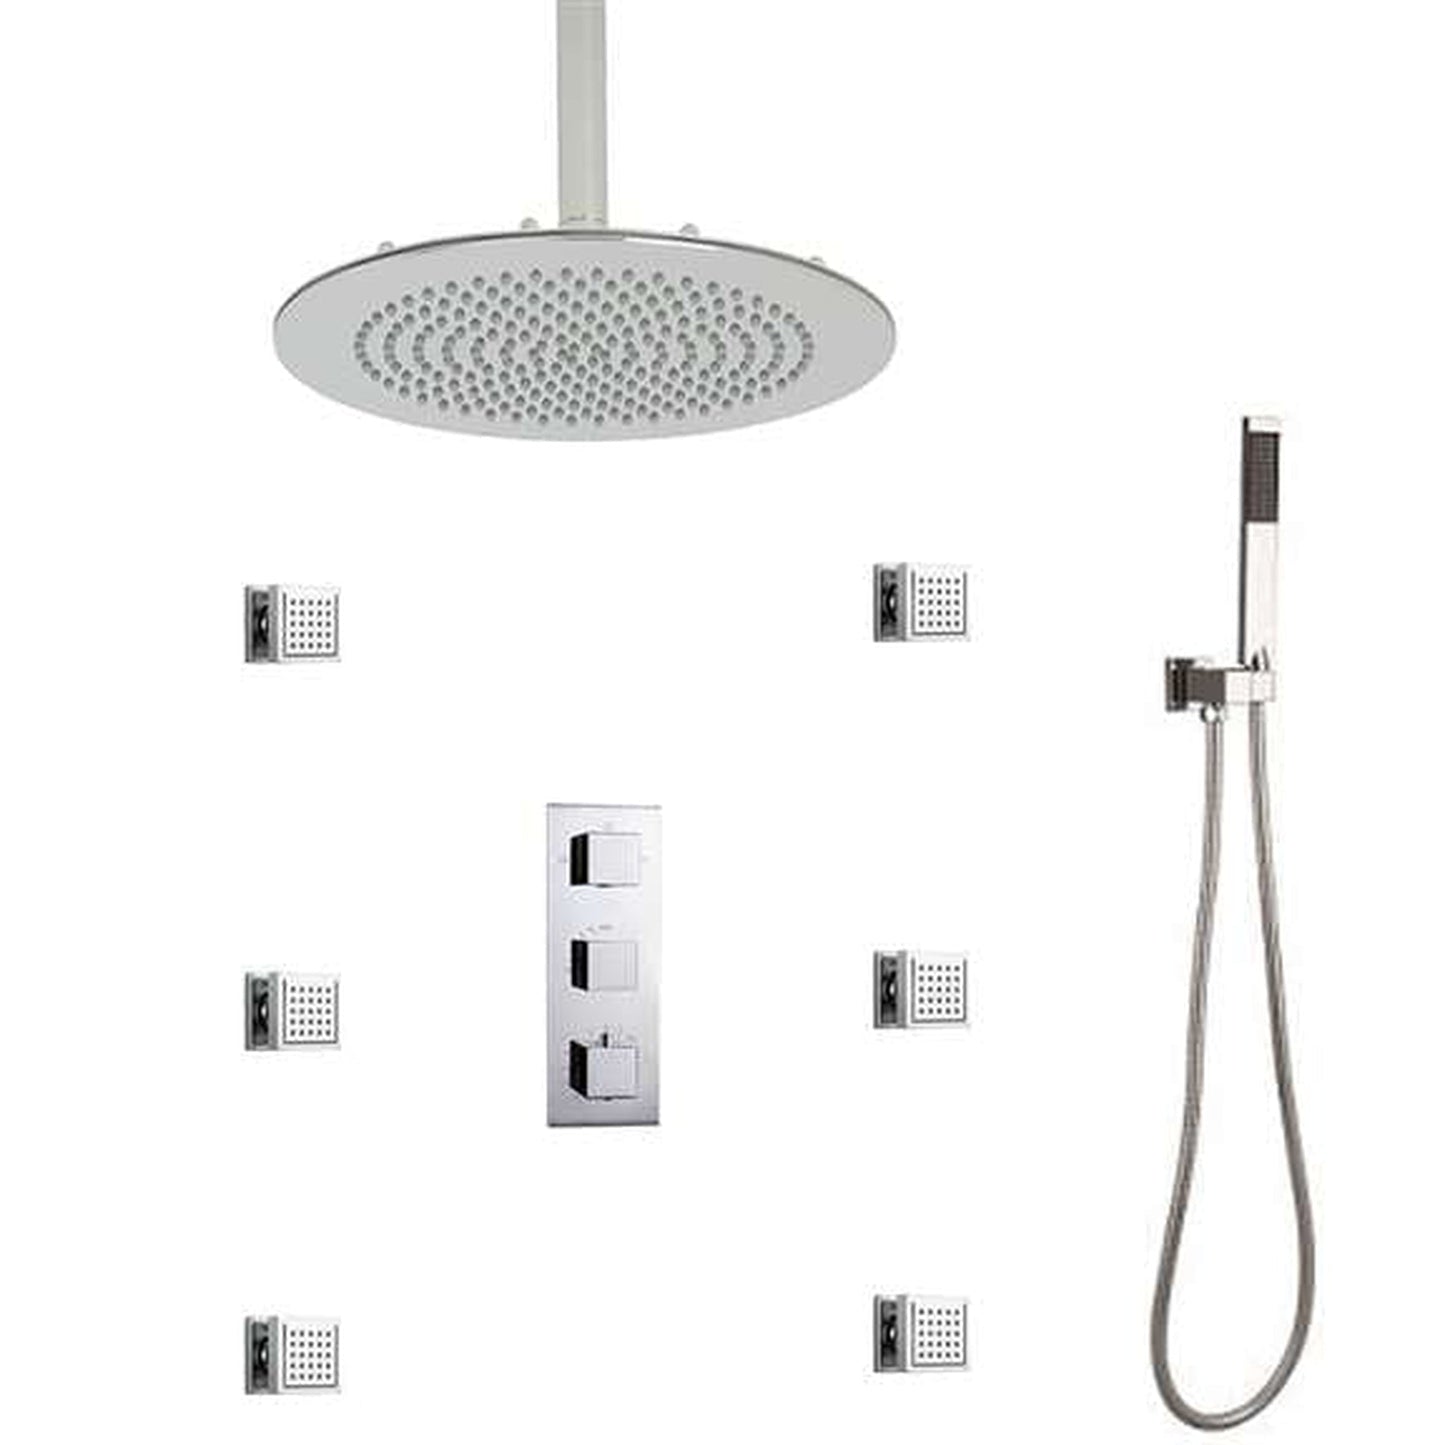 FontanaShowers Atlantic Creative Luxury 24" Large Chrome Round Ceiling Mounted Massage Shower System With Water Powered LED Lights, 6-Jet Body Sprays and Hand Shower